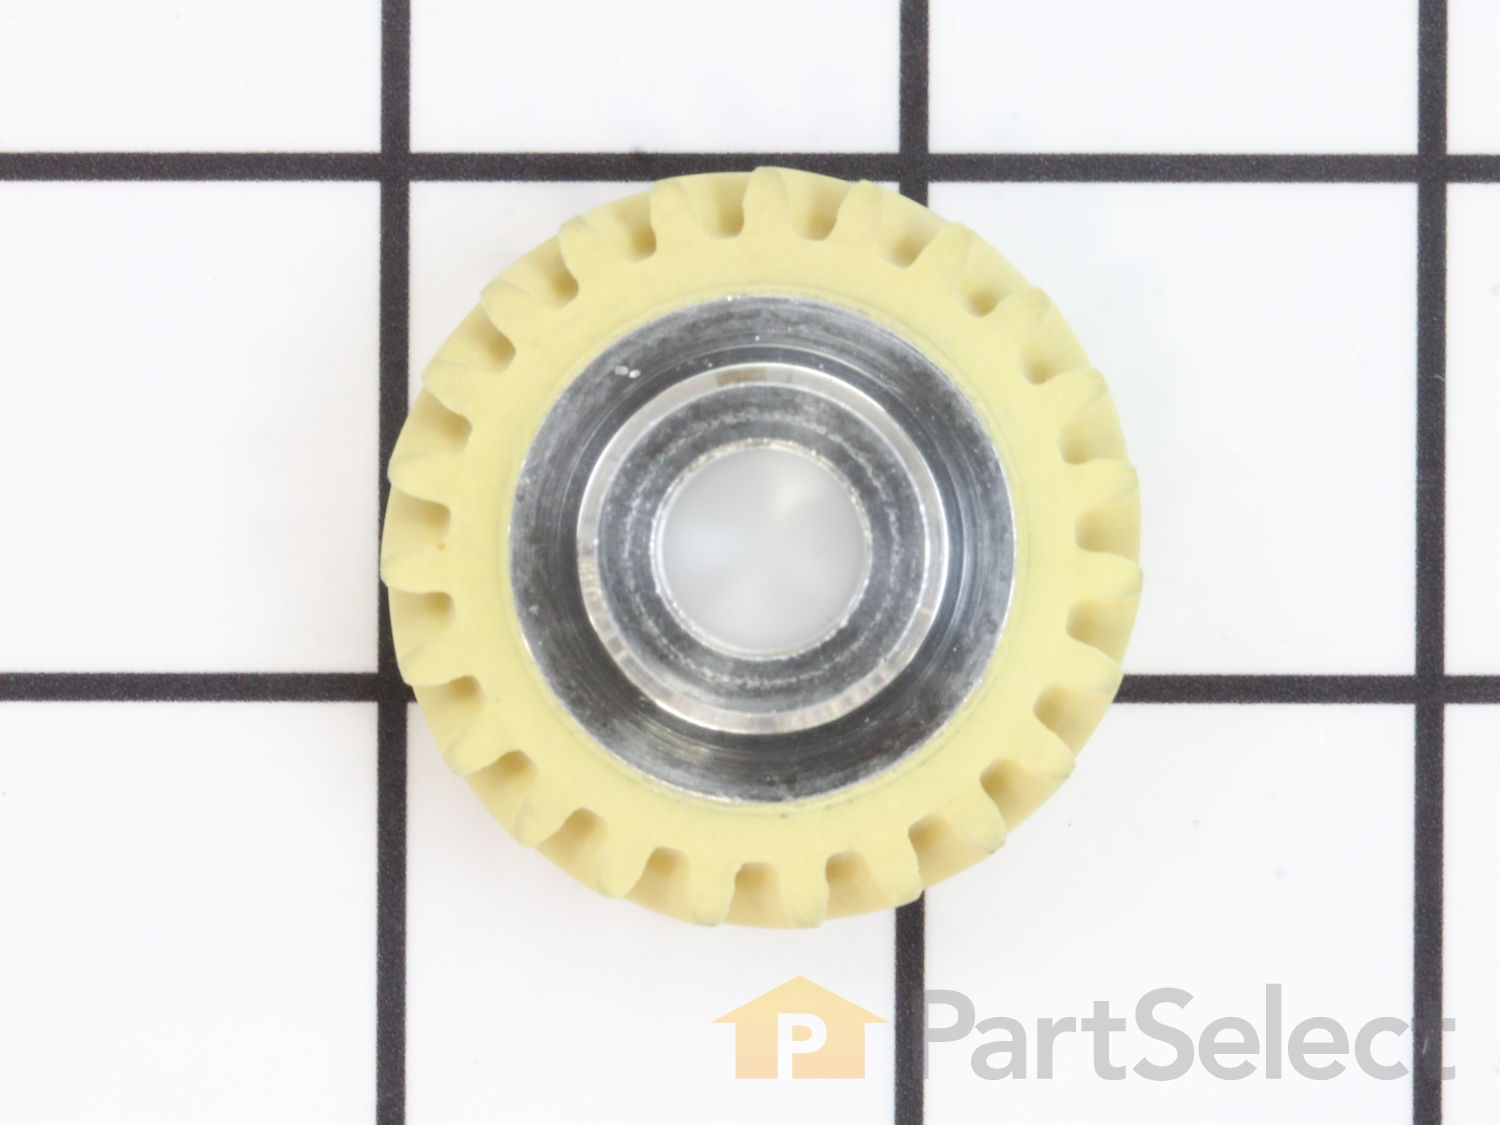 Generic W10112253 Mixer Worm Gear Replacement Part Perfectly Fit